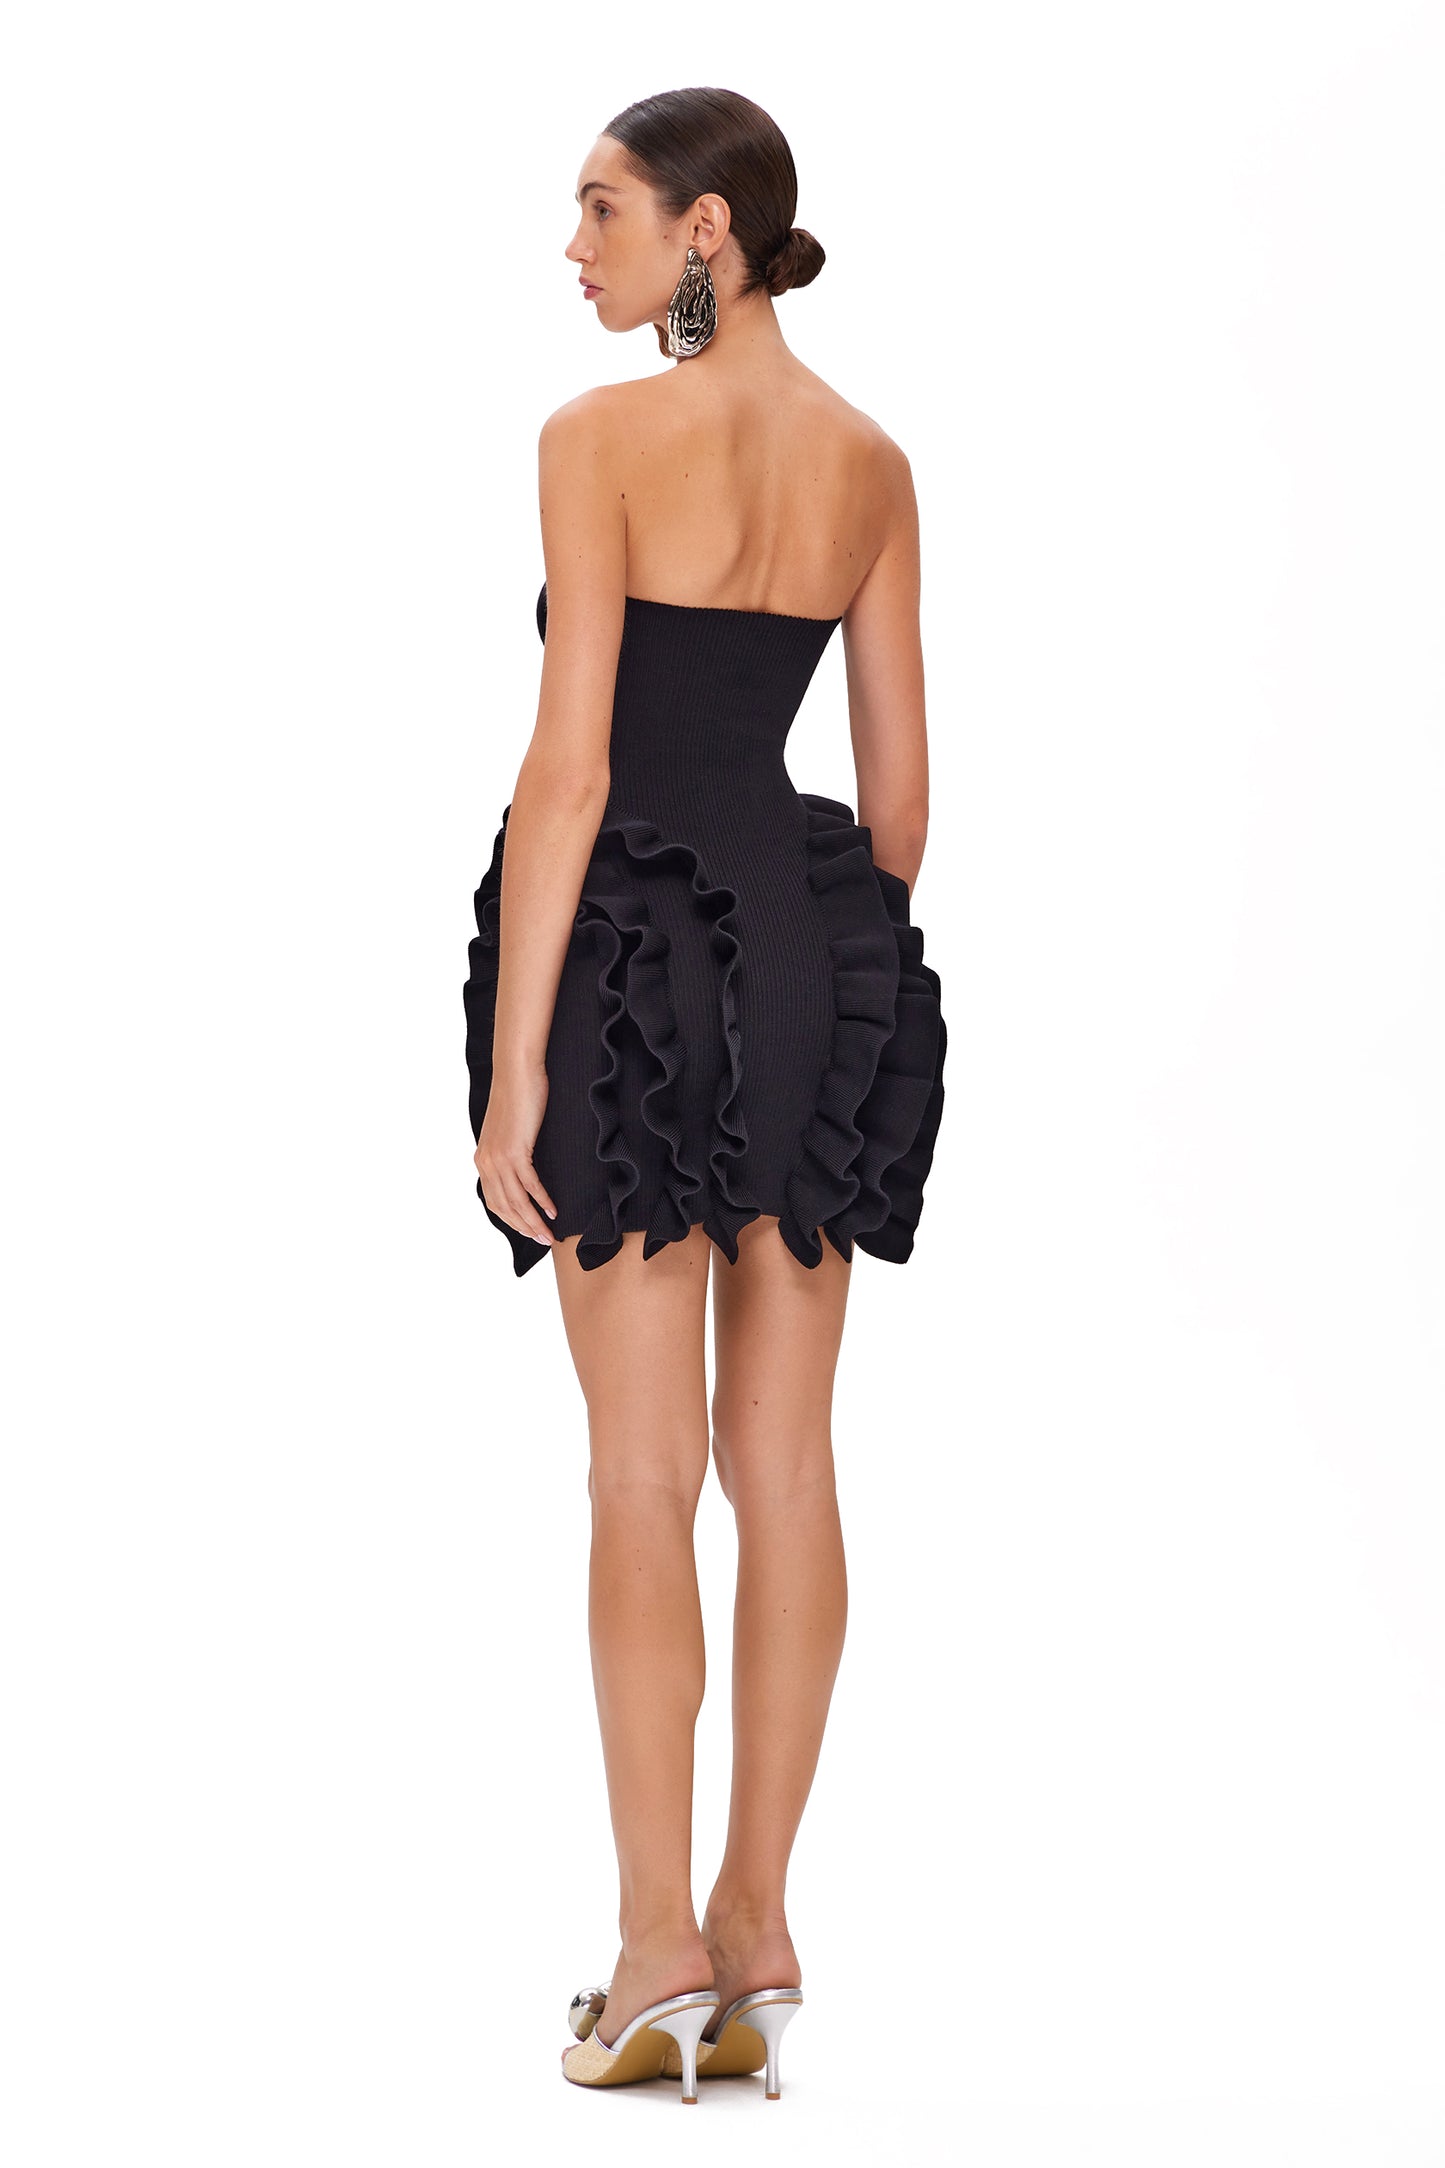 KNITTED COUTURE MINI DRESS WITH OPEN SHOULDERS AND RUFFLES ON HIPS "BLACK PEONY"